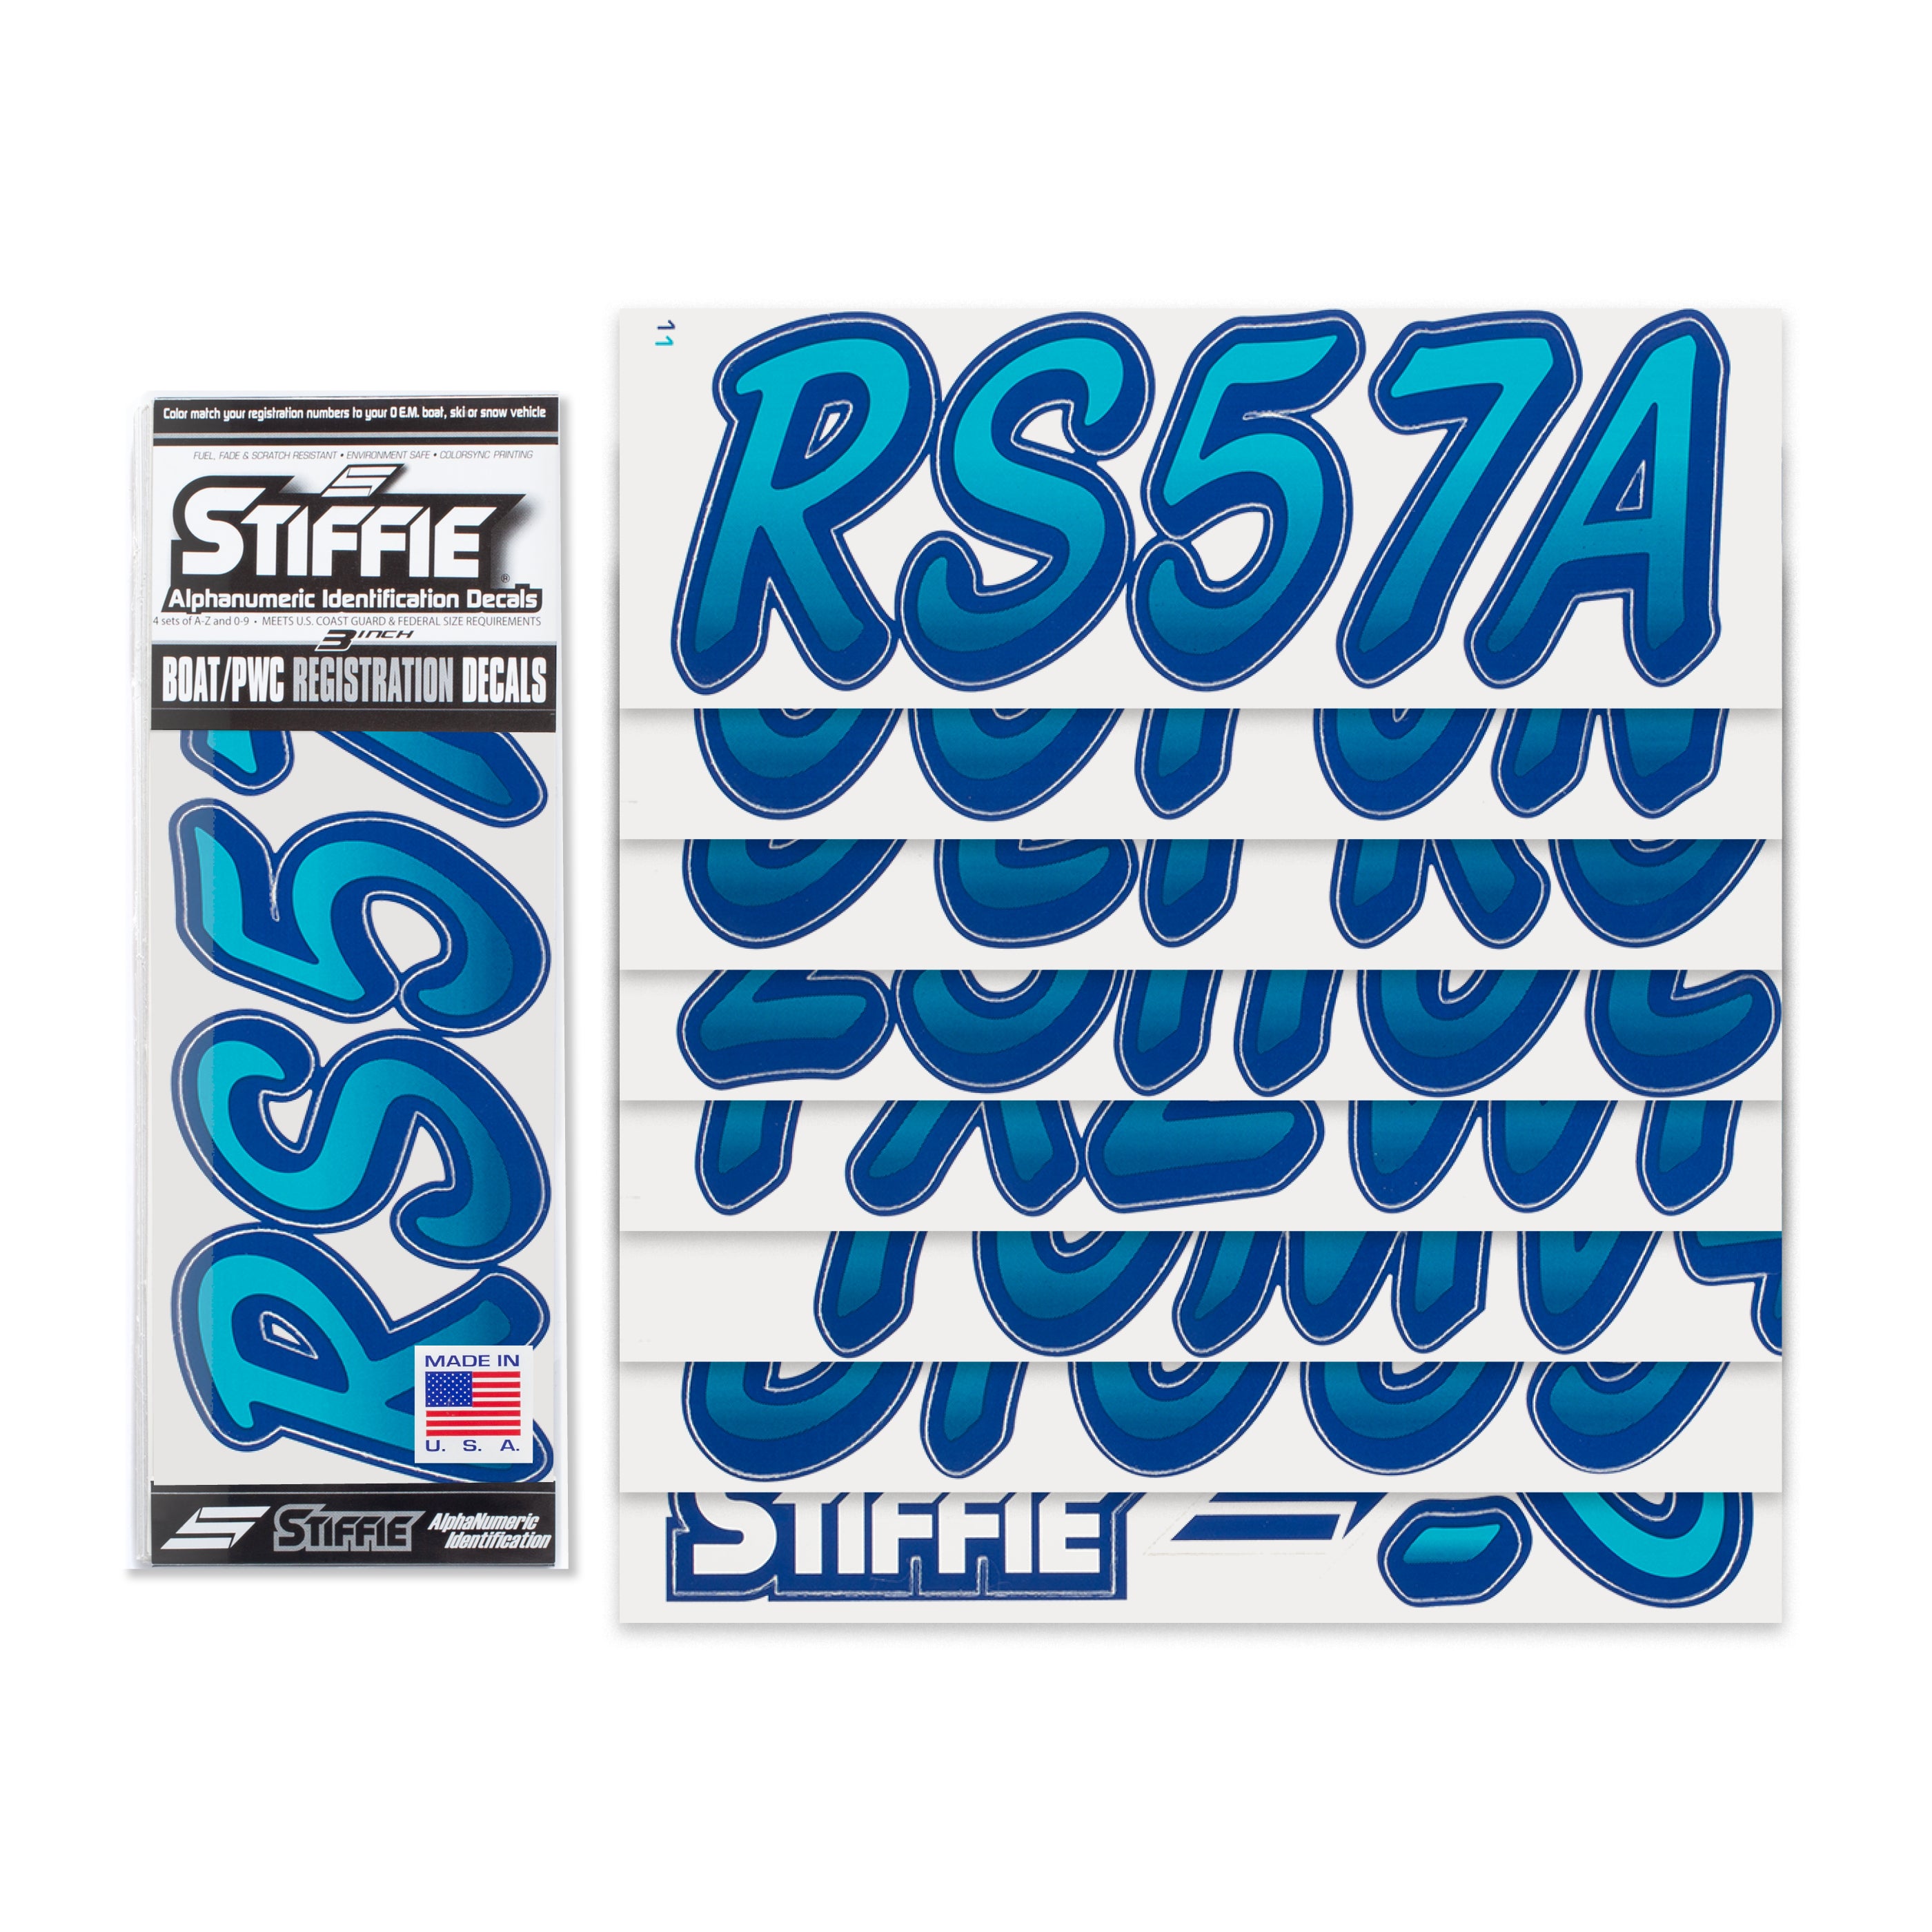 STIFFIE Whipline Aqua/Navy 3" Alpha-Numeric Registration Identification Numbers Stickers Decals for Boats & Personal Watercraft